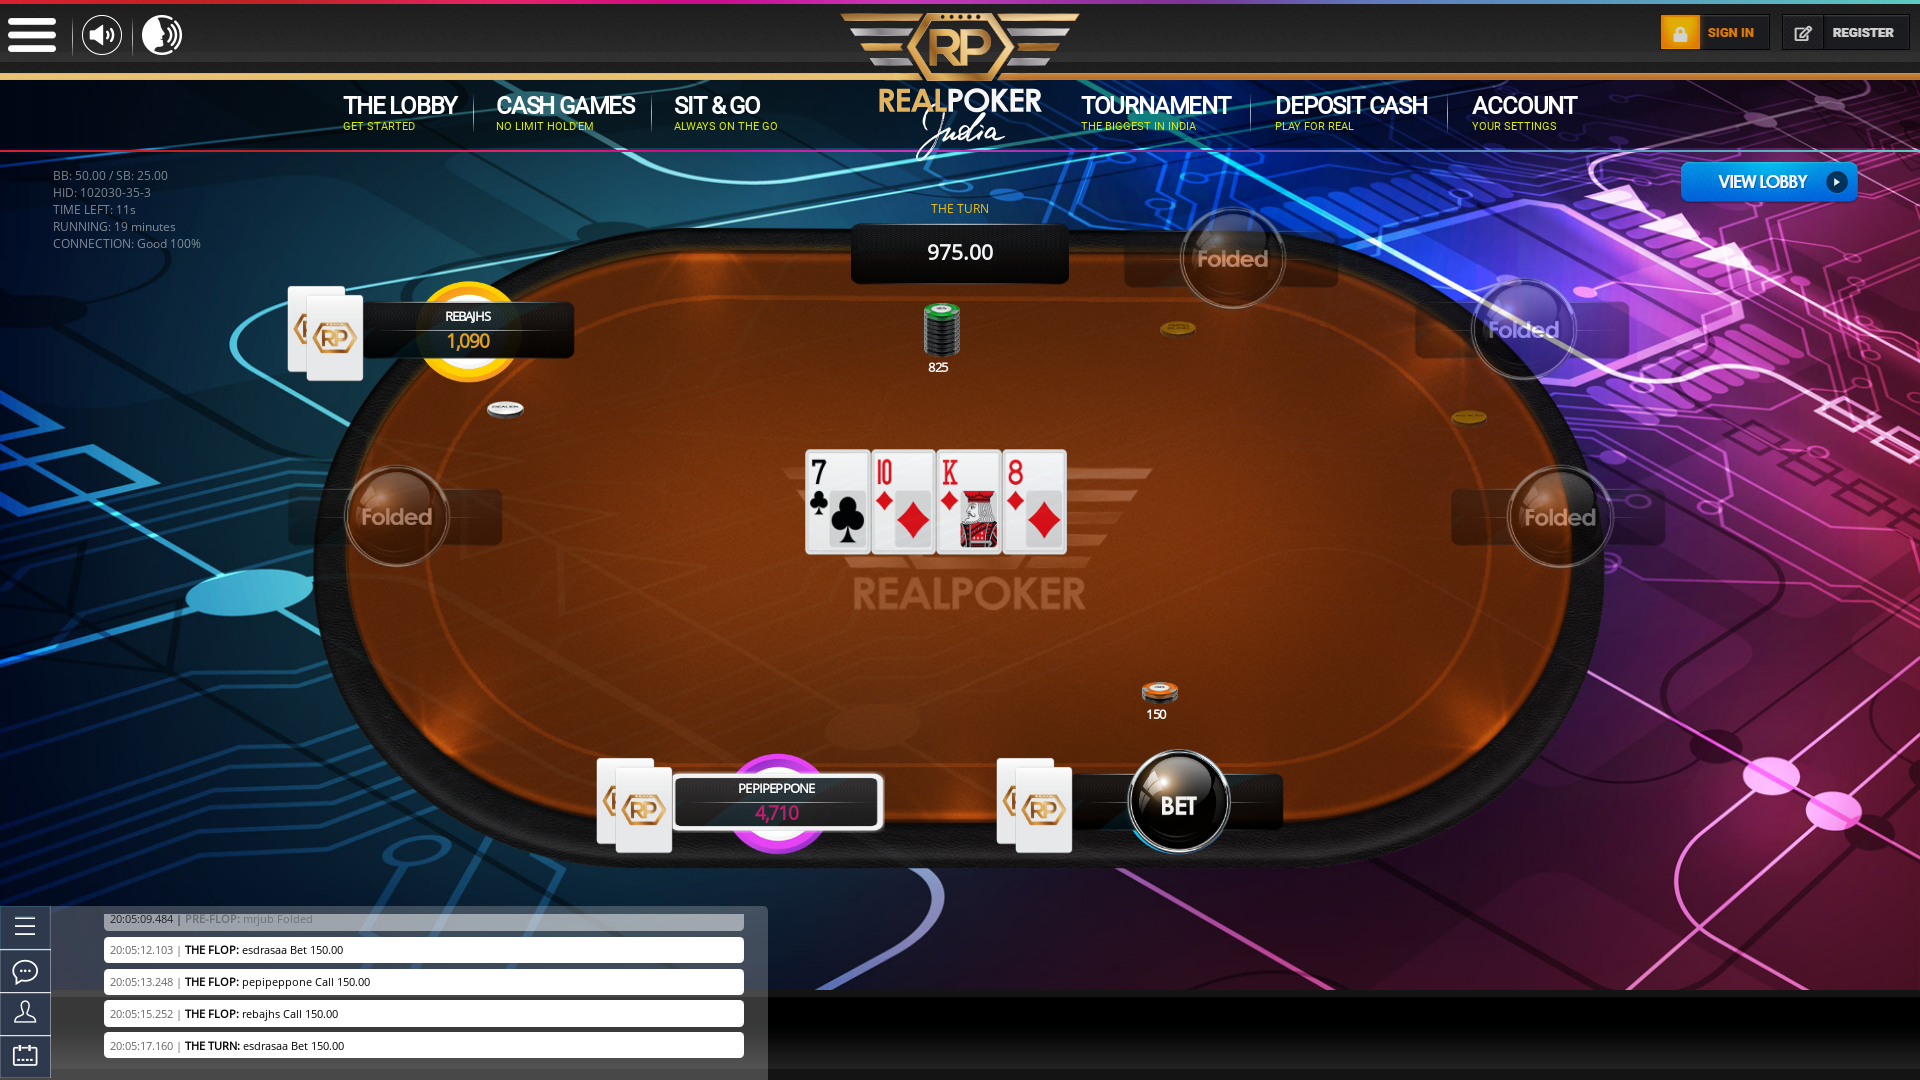 Real Indian poker on a 10 player table in the 19th minute of the game